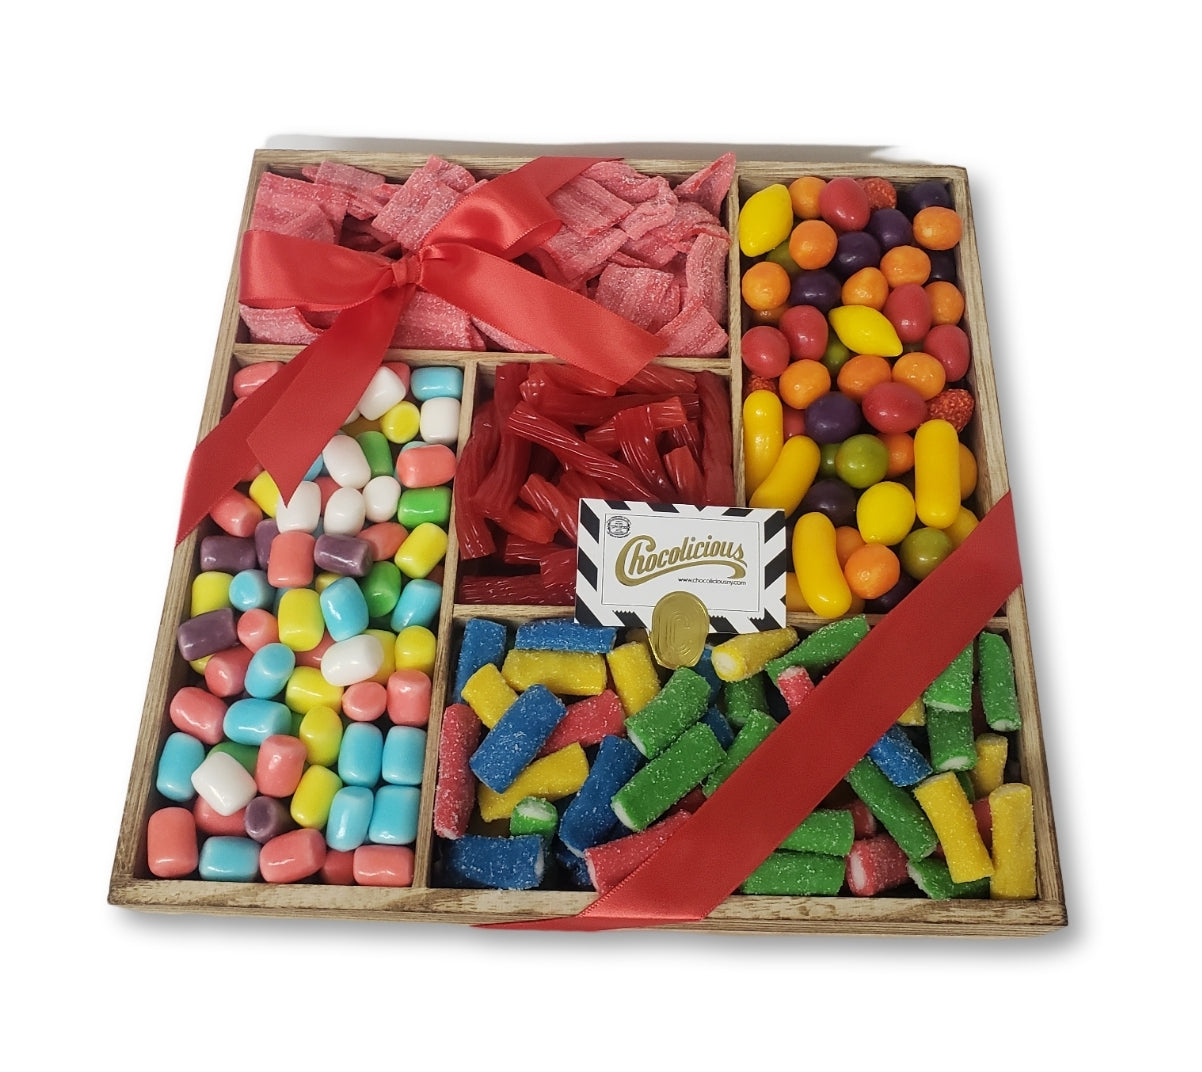 5 Section candy tray